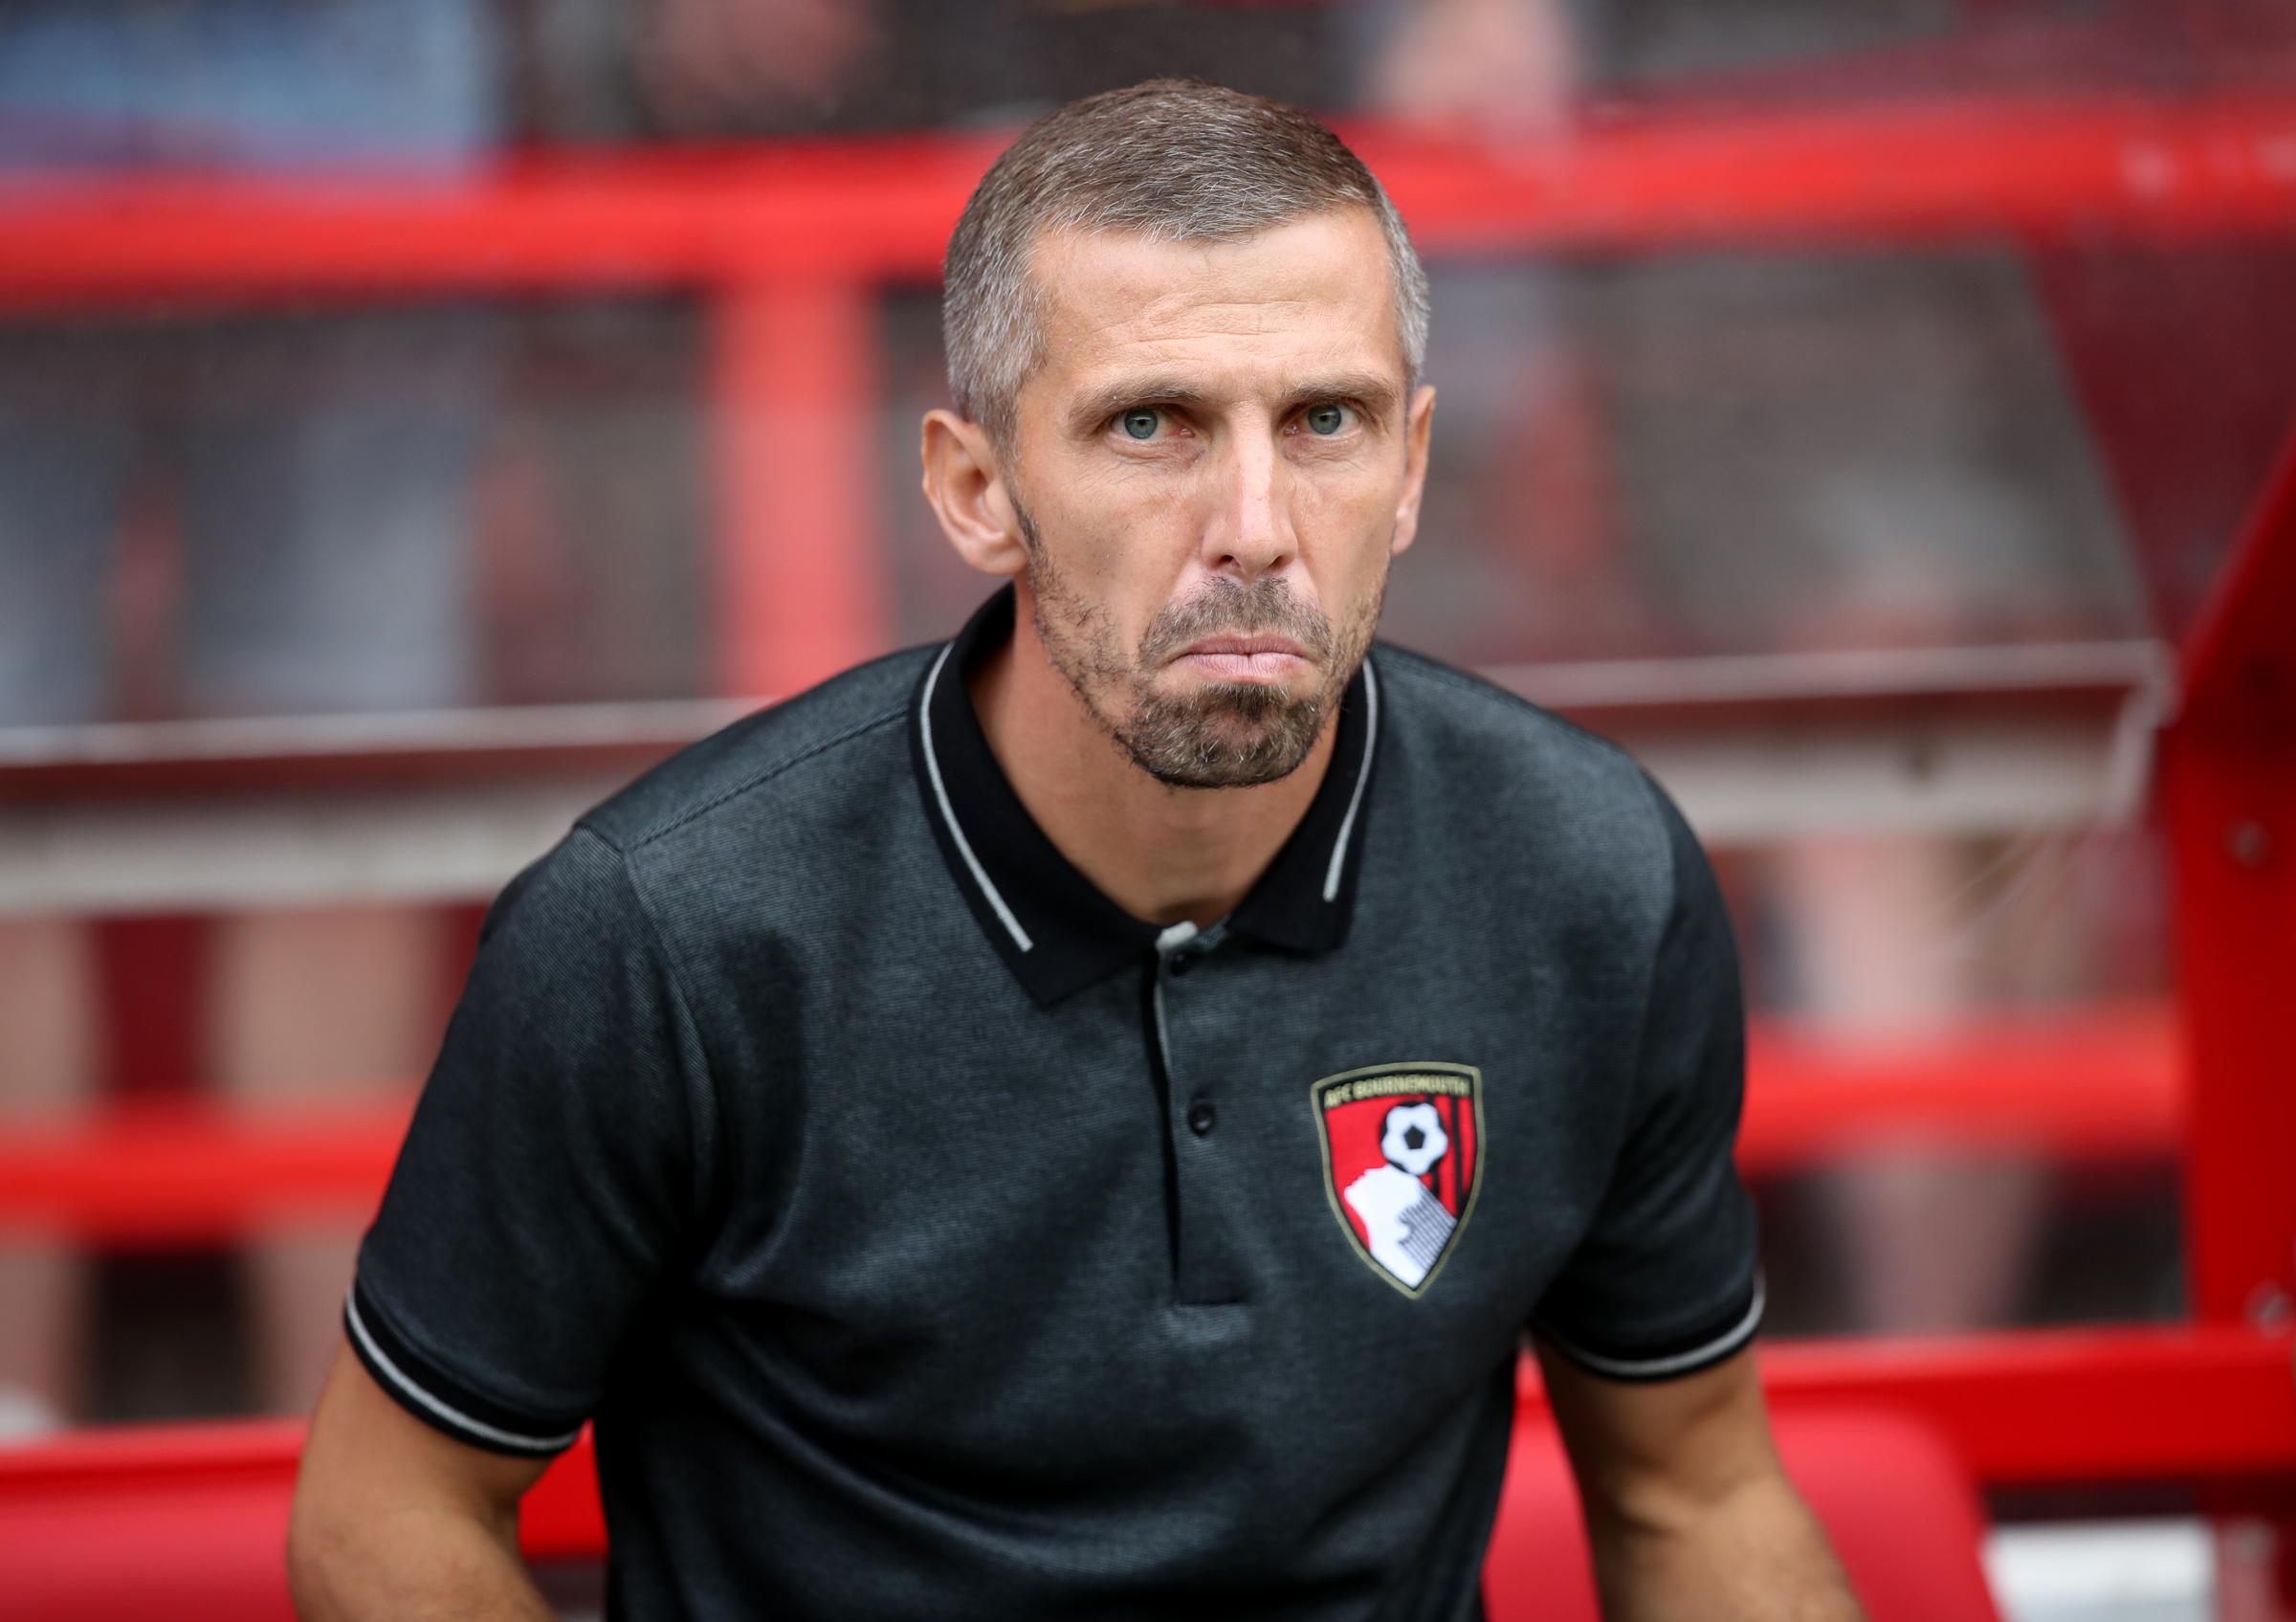 Middlesbrough will not make manager approach for Gary O'Neil